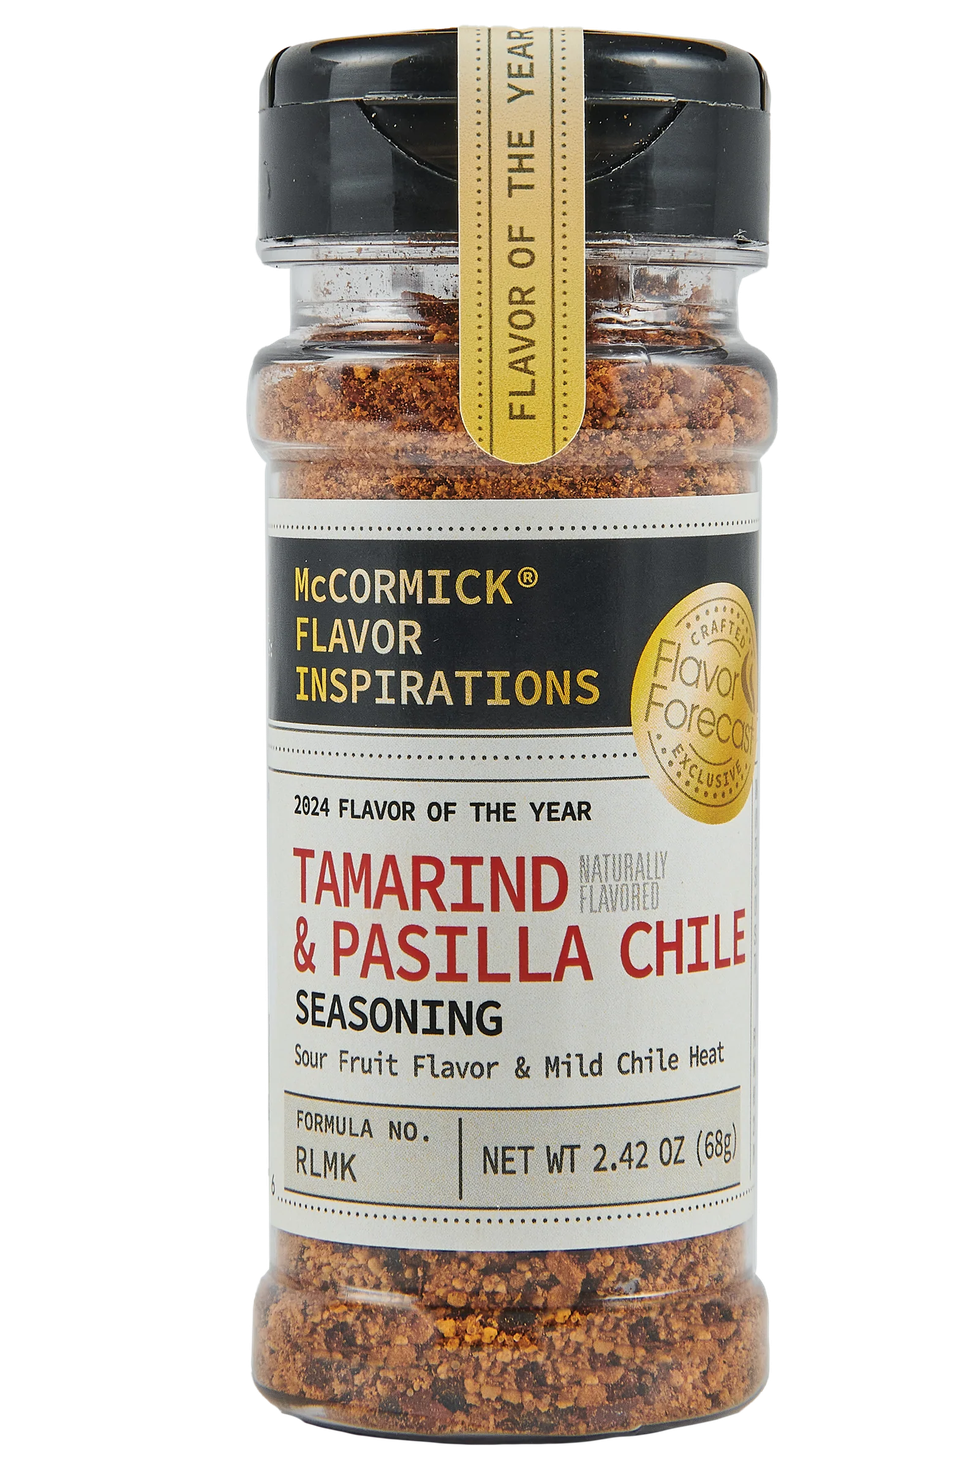 mccormick culinary 2024 flavor of the year tamarind